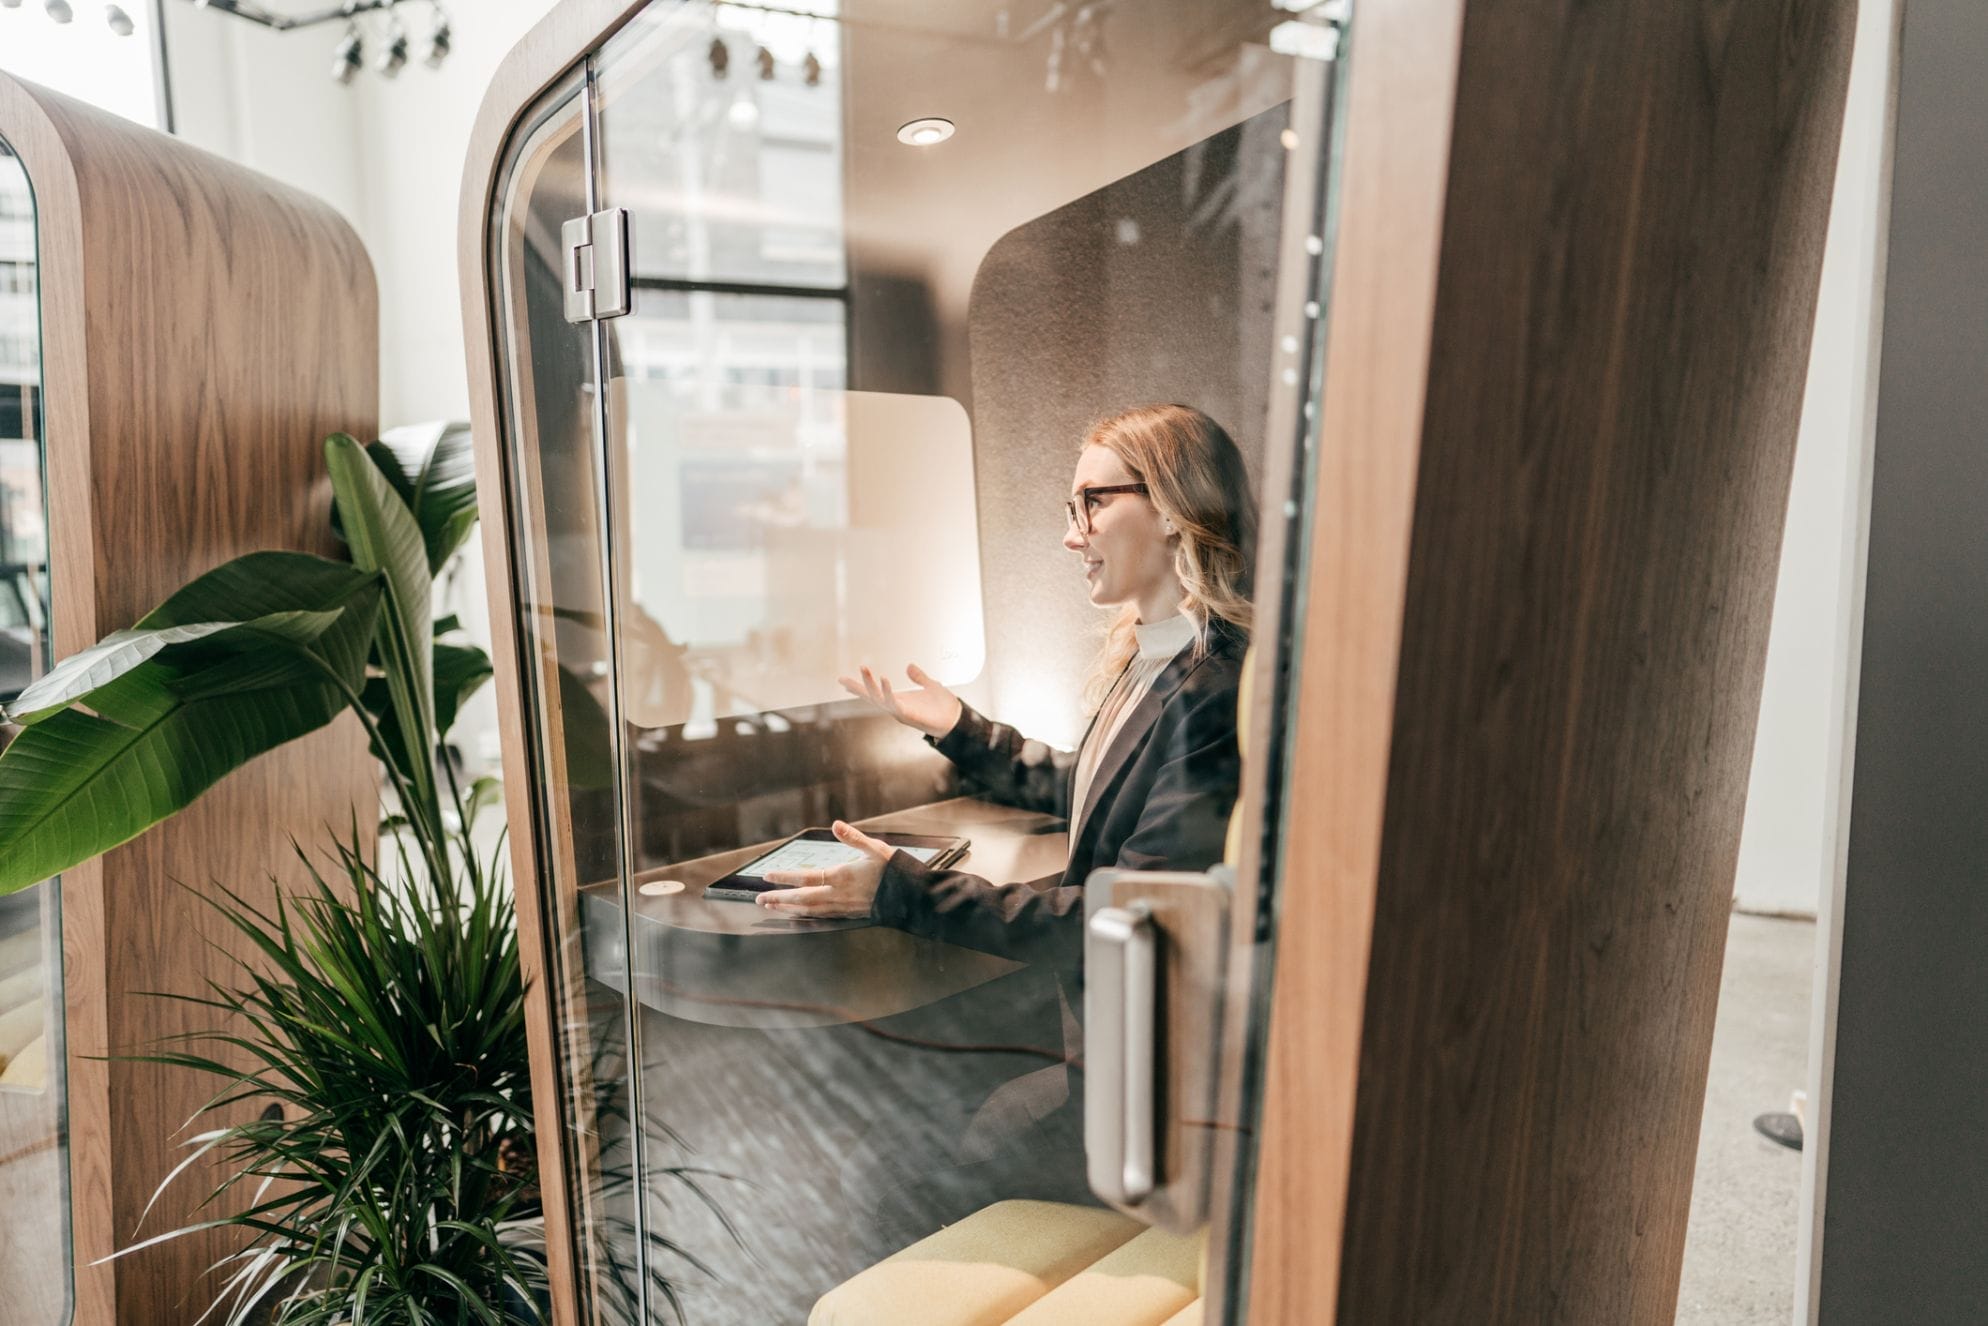 A woman speaking in an enclosed office pod.